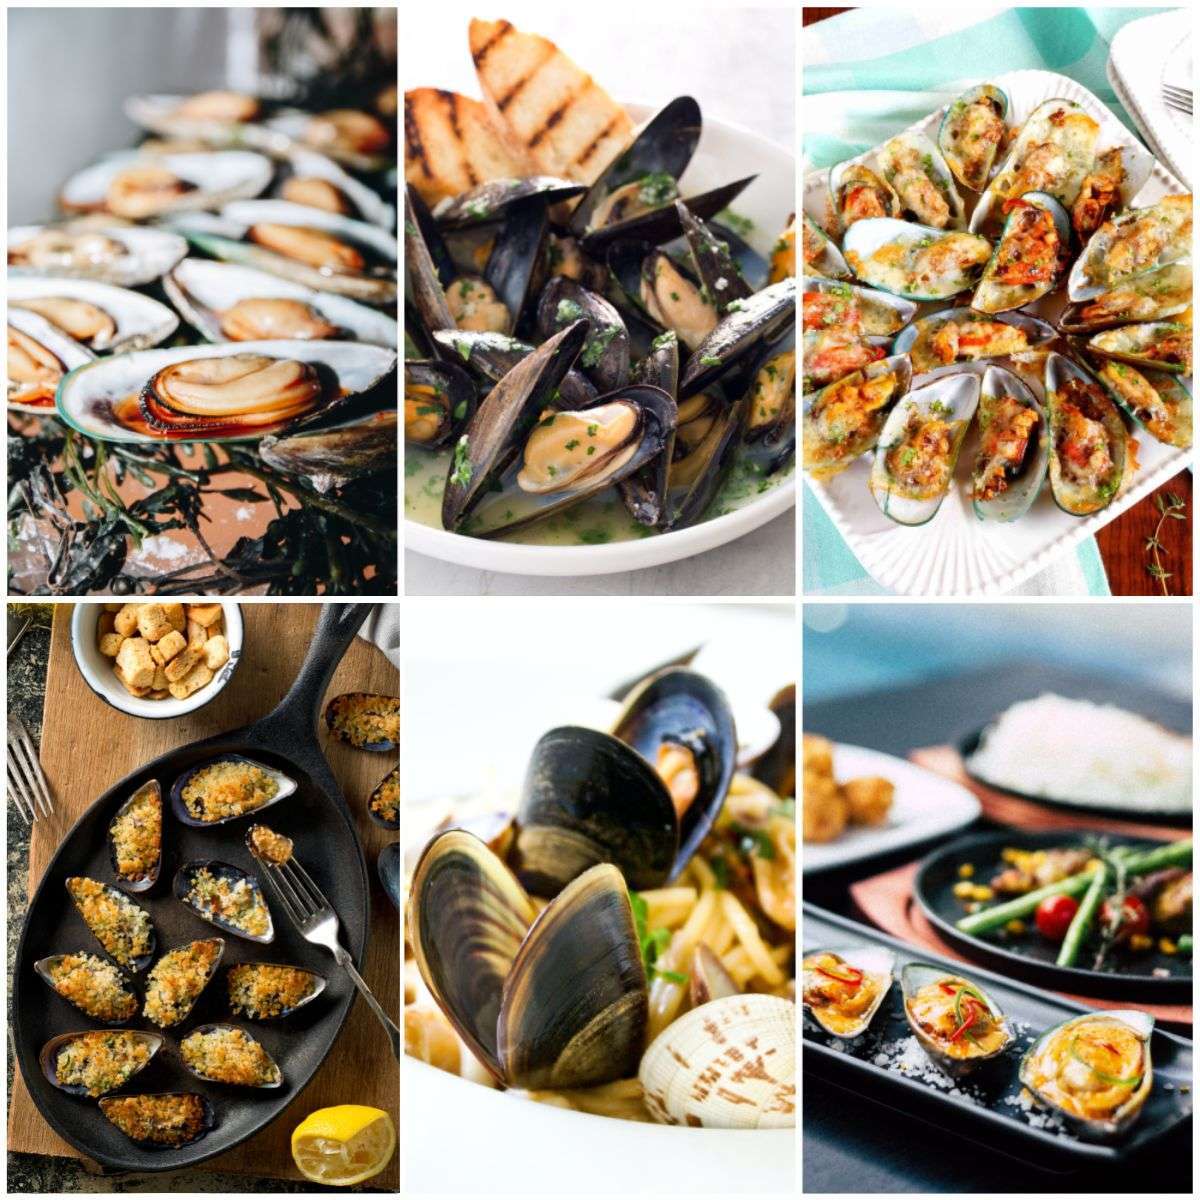 Baked mussels recipes